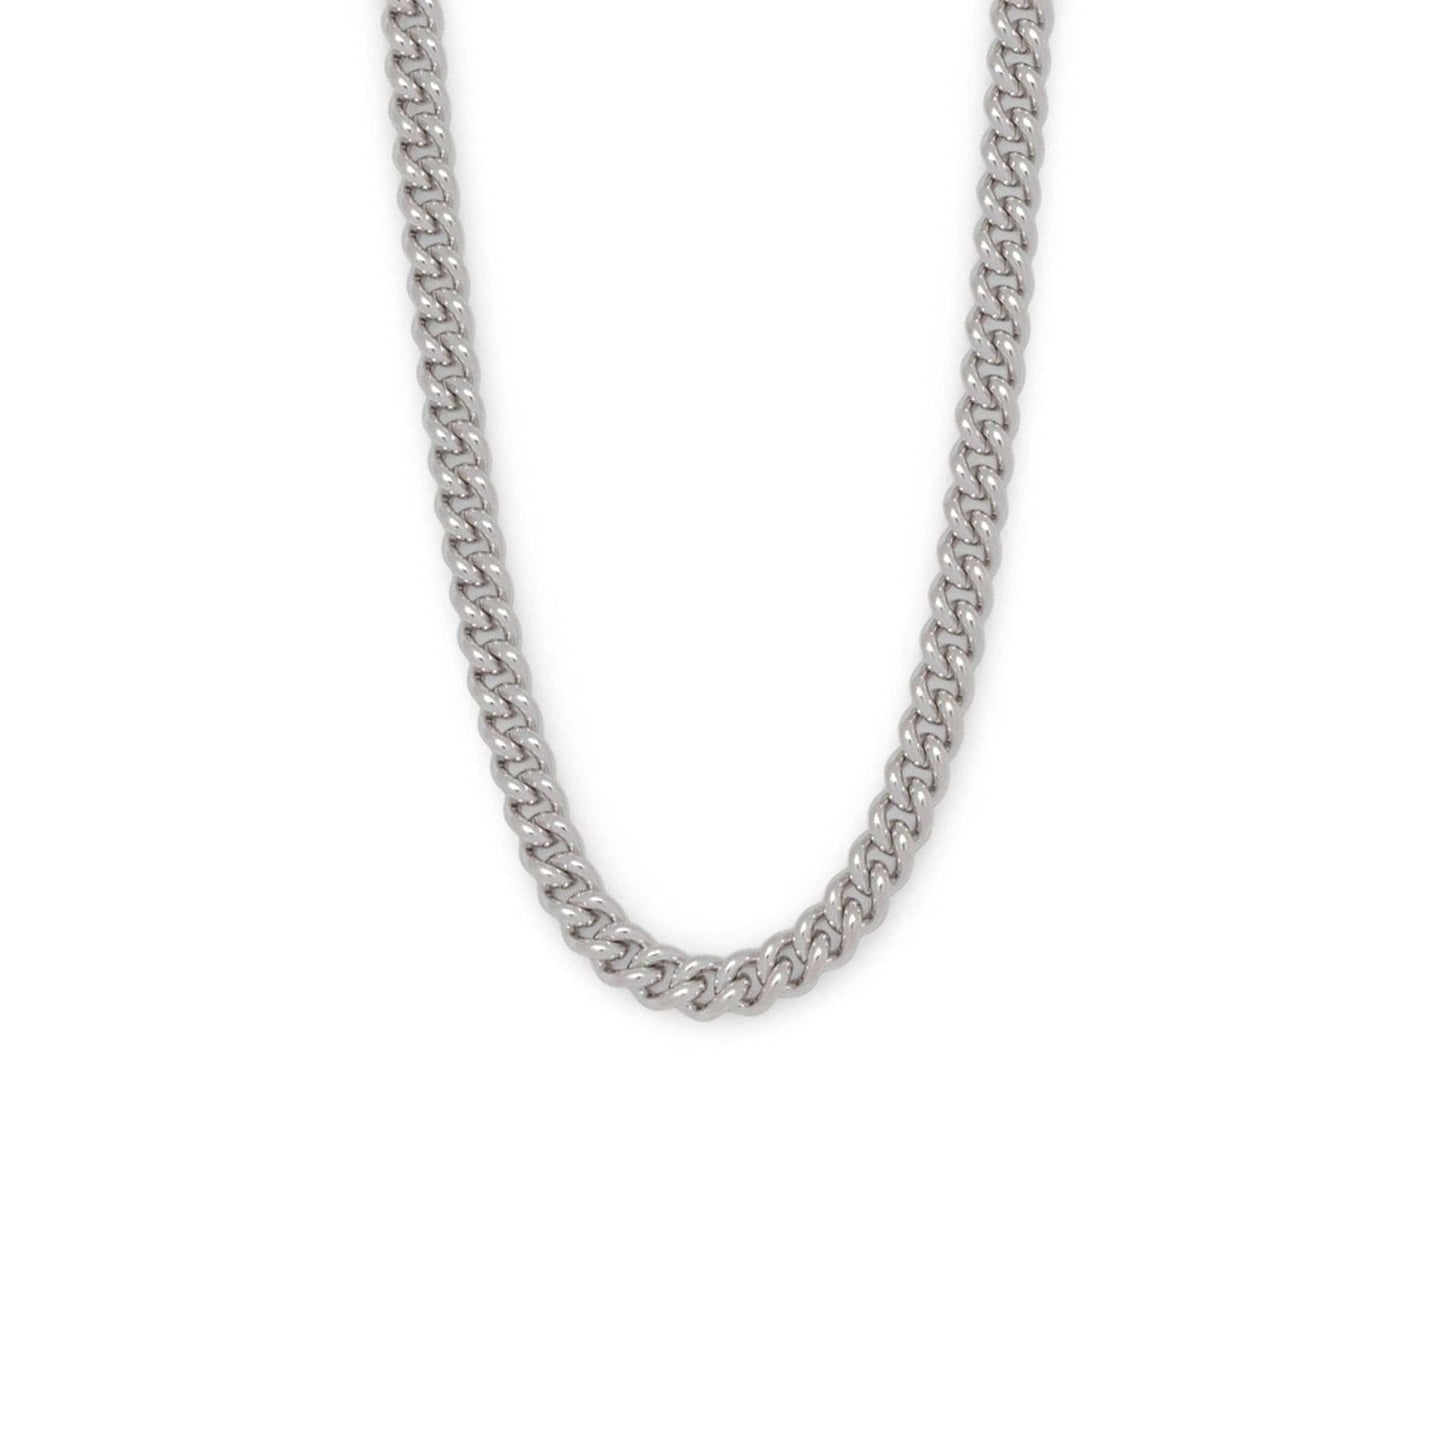 Tom Wood Jewelry 925 STERLING SILVER / O/S ROUNDED CURB CHAIN THIN